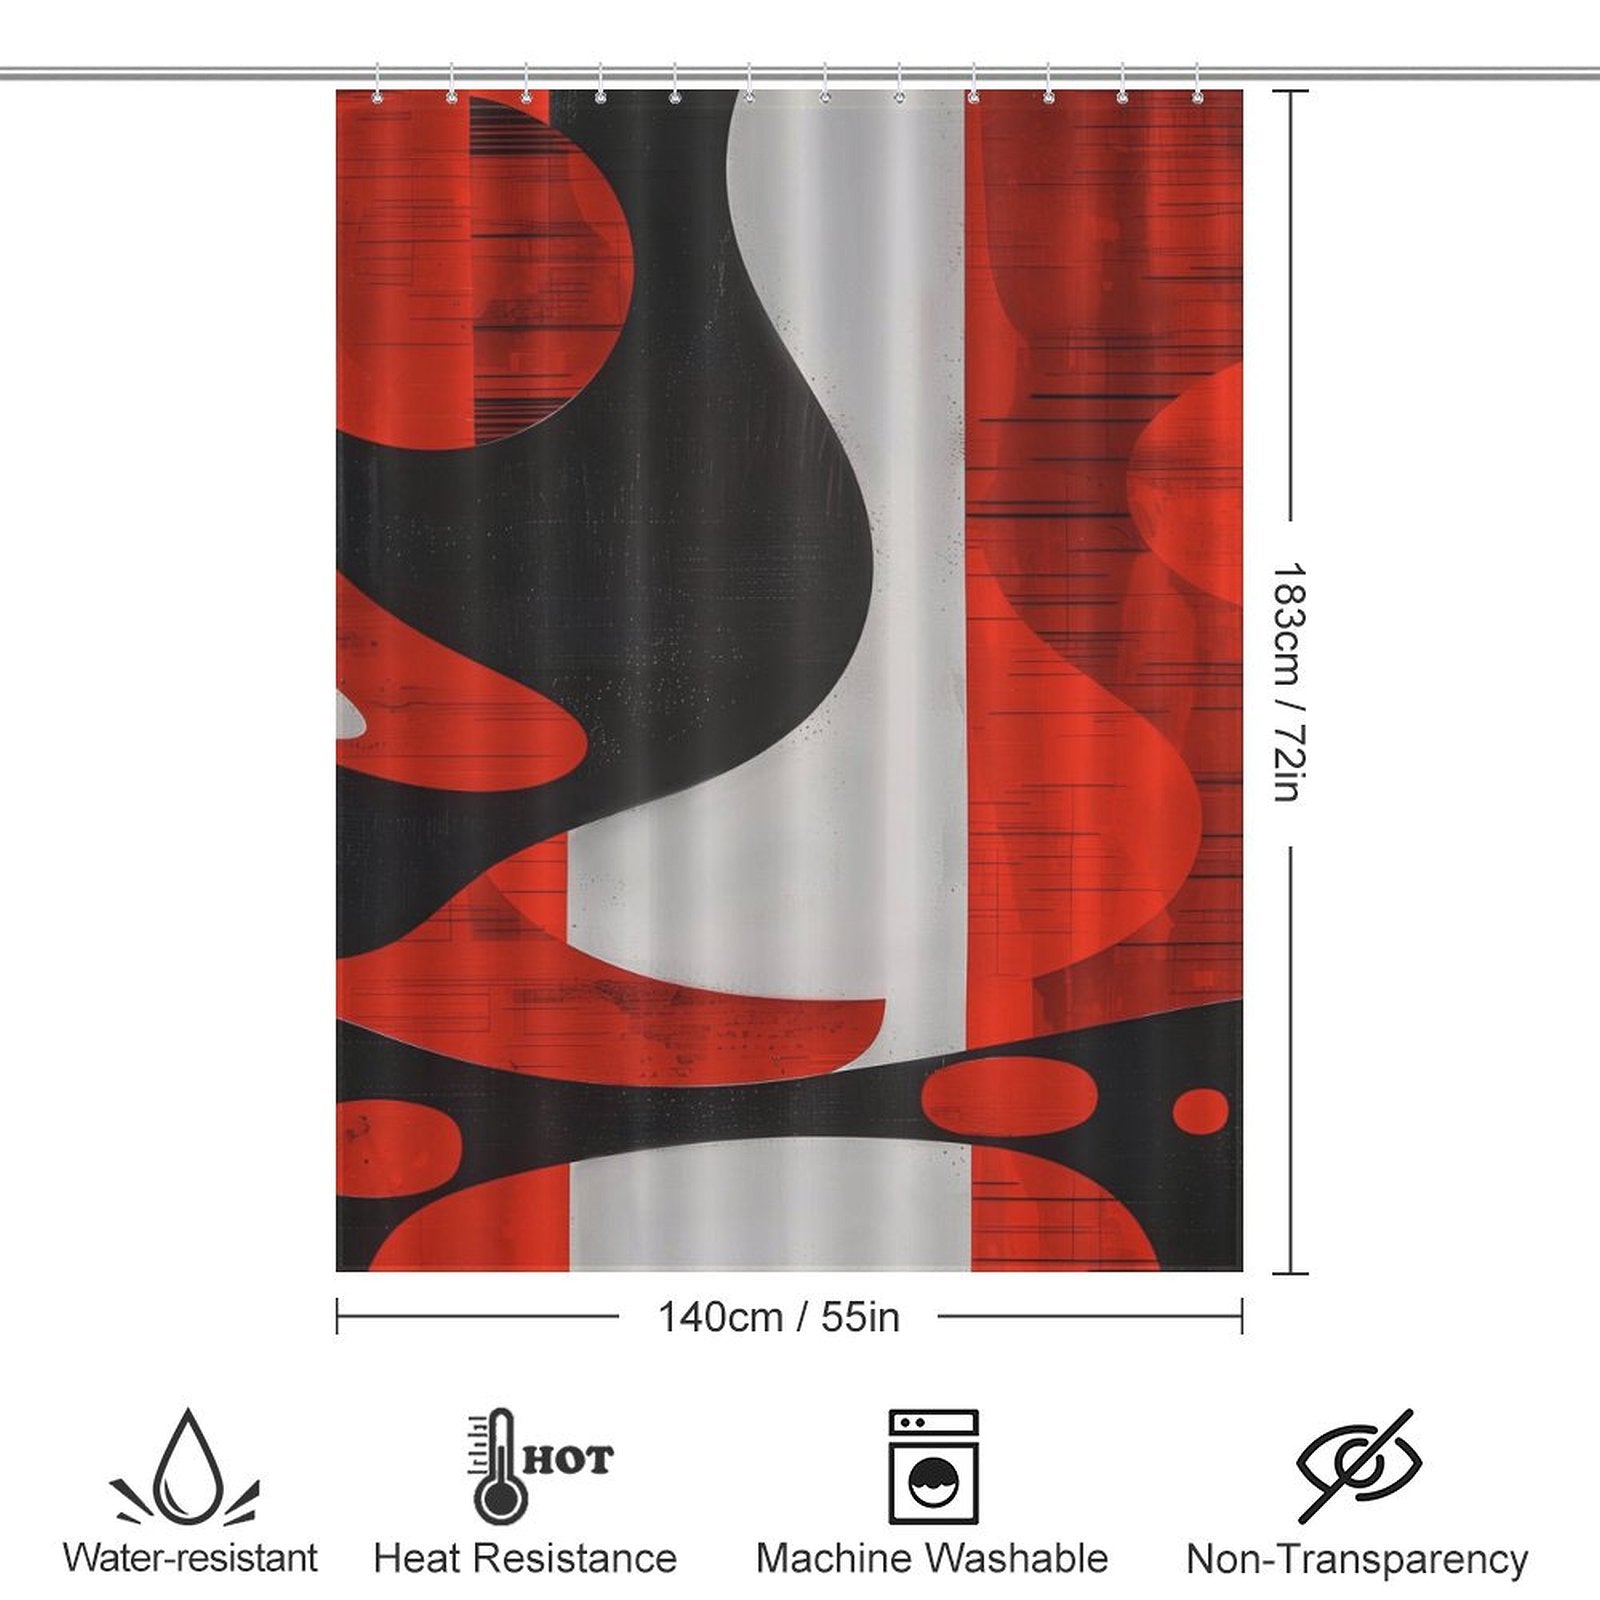 This Mid Century Modern Geometric Art Minimalist Grey Red and Black Abstract Shower Curtain-Cottoncat, featuring an abstract geometric art design in red, black, and white, measures 183 cm by 140 cm. It offers water resistance, heat resistance, and non-transparency while being machine washable for easy care. Perfect for a touch of mid-century modern style.